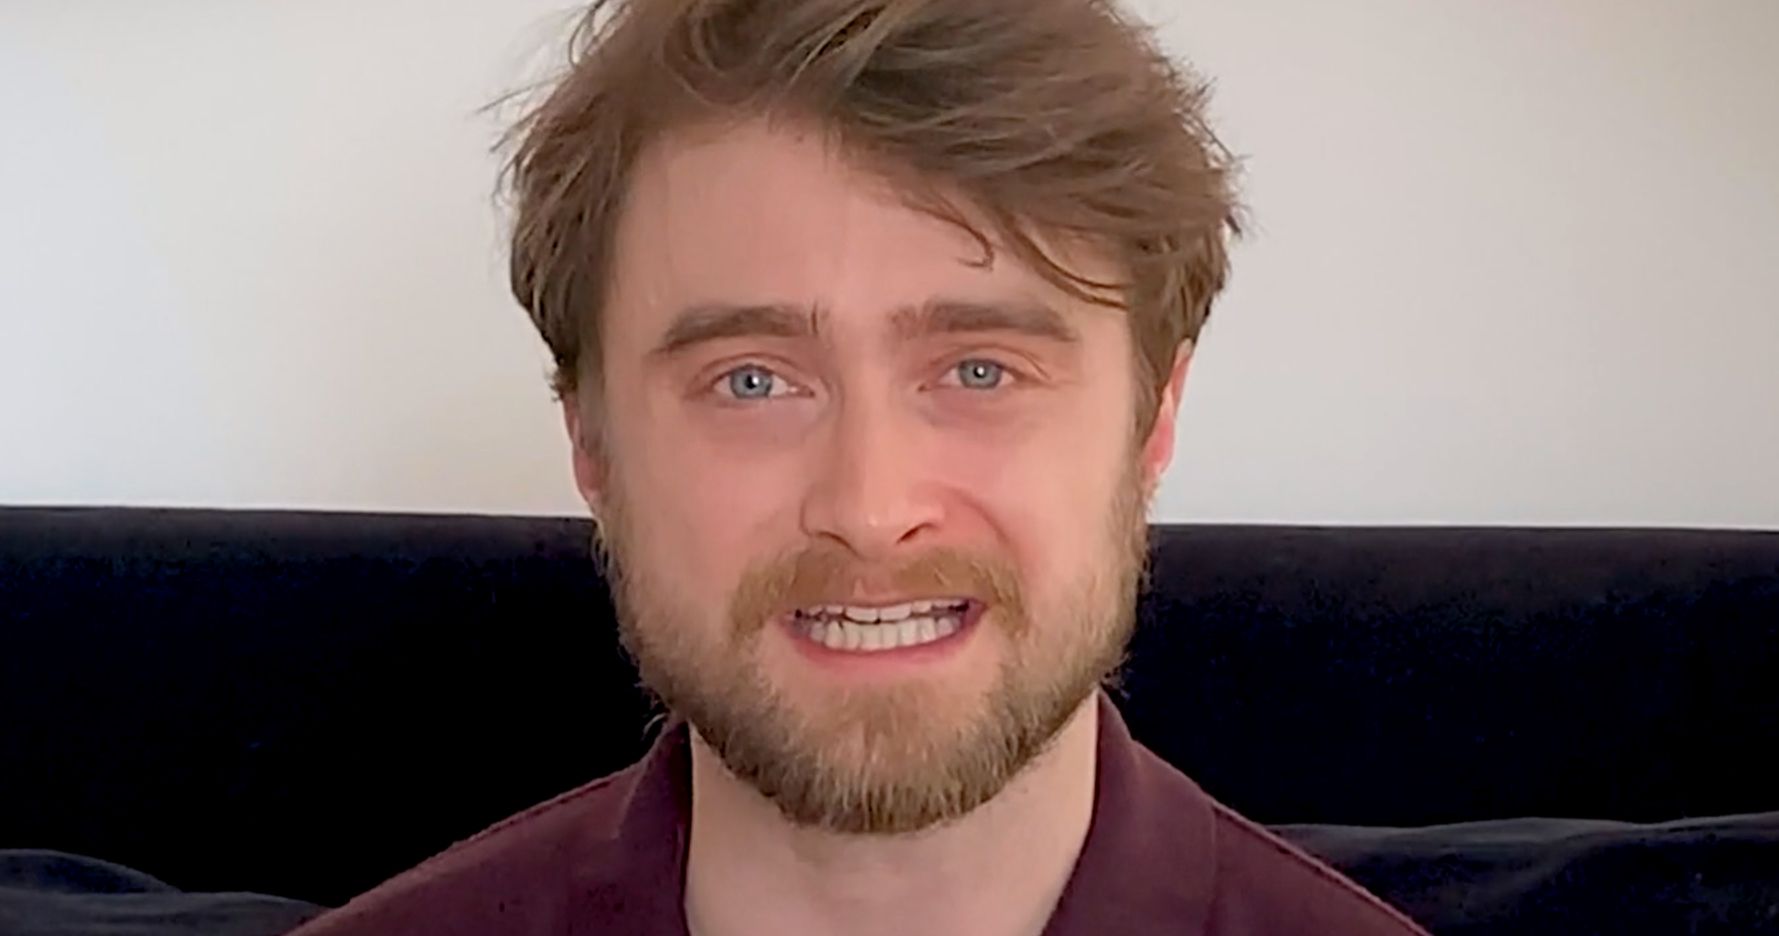 Watch as Daniel Radcliffe Reads Harry Potter for Everyone Stuck at Home